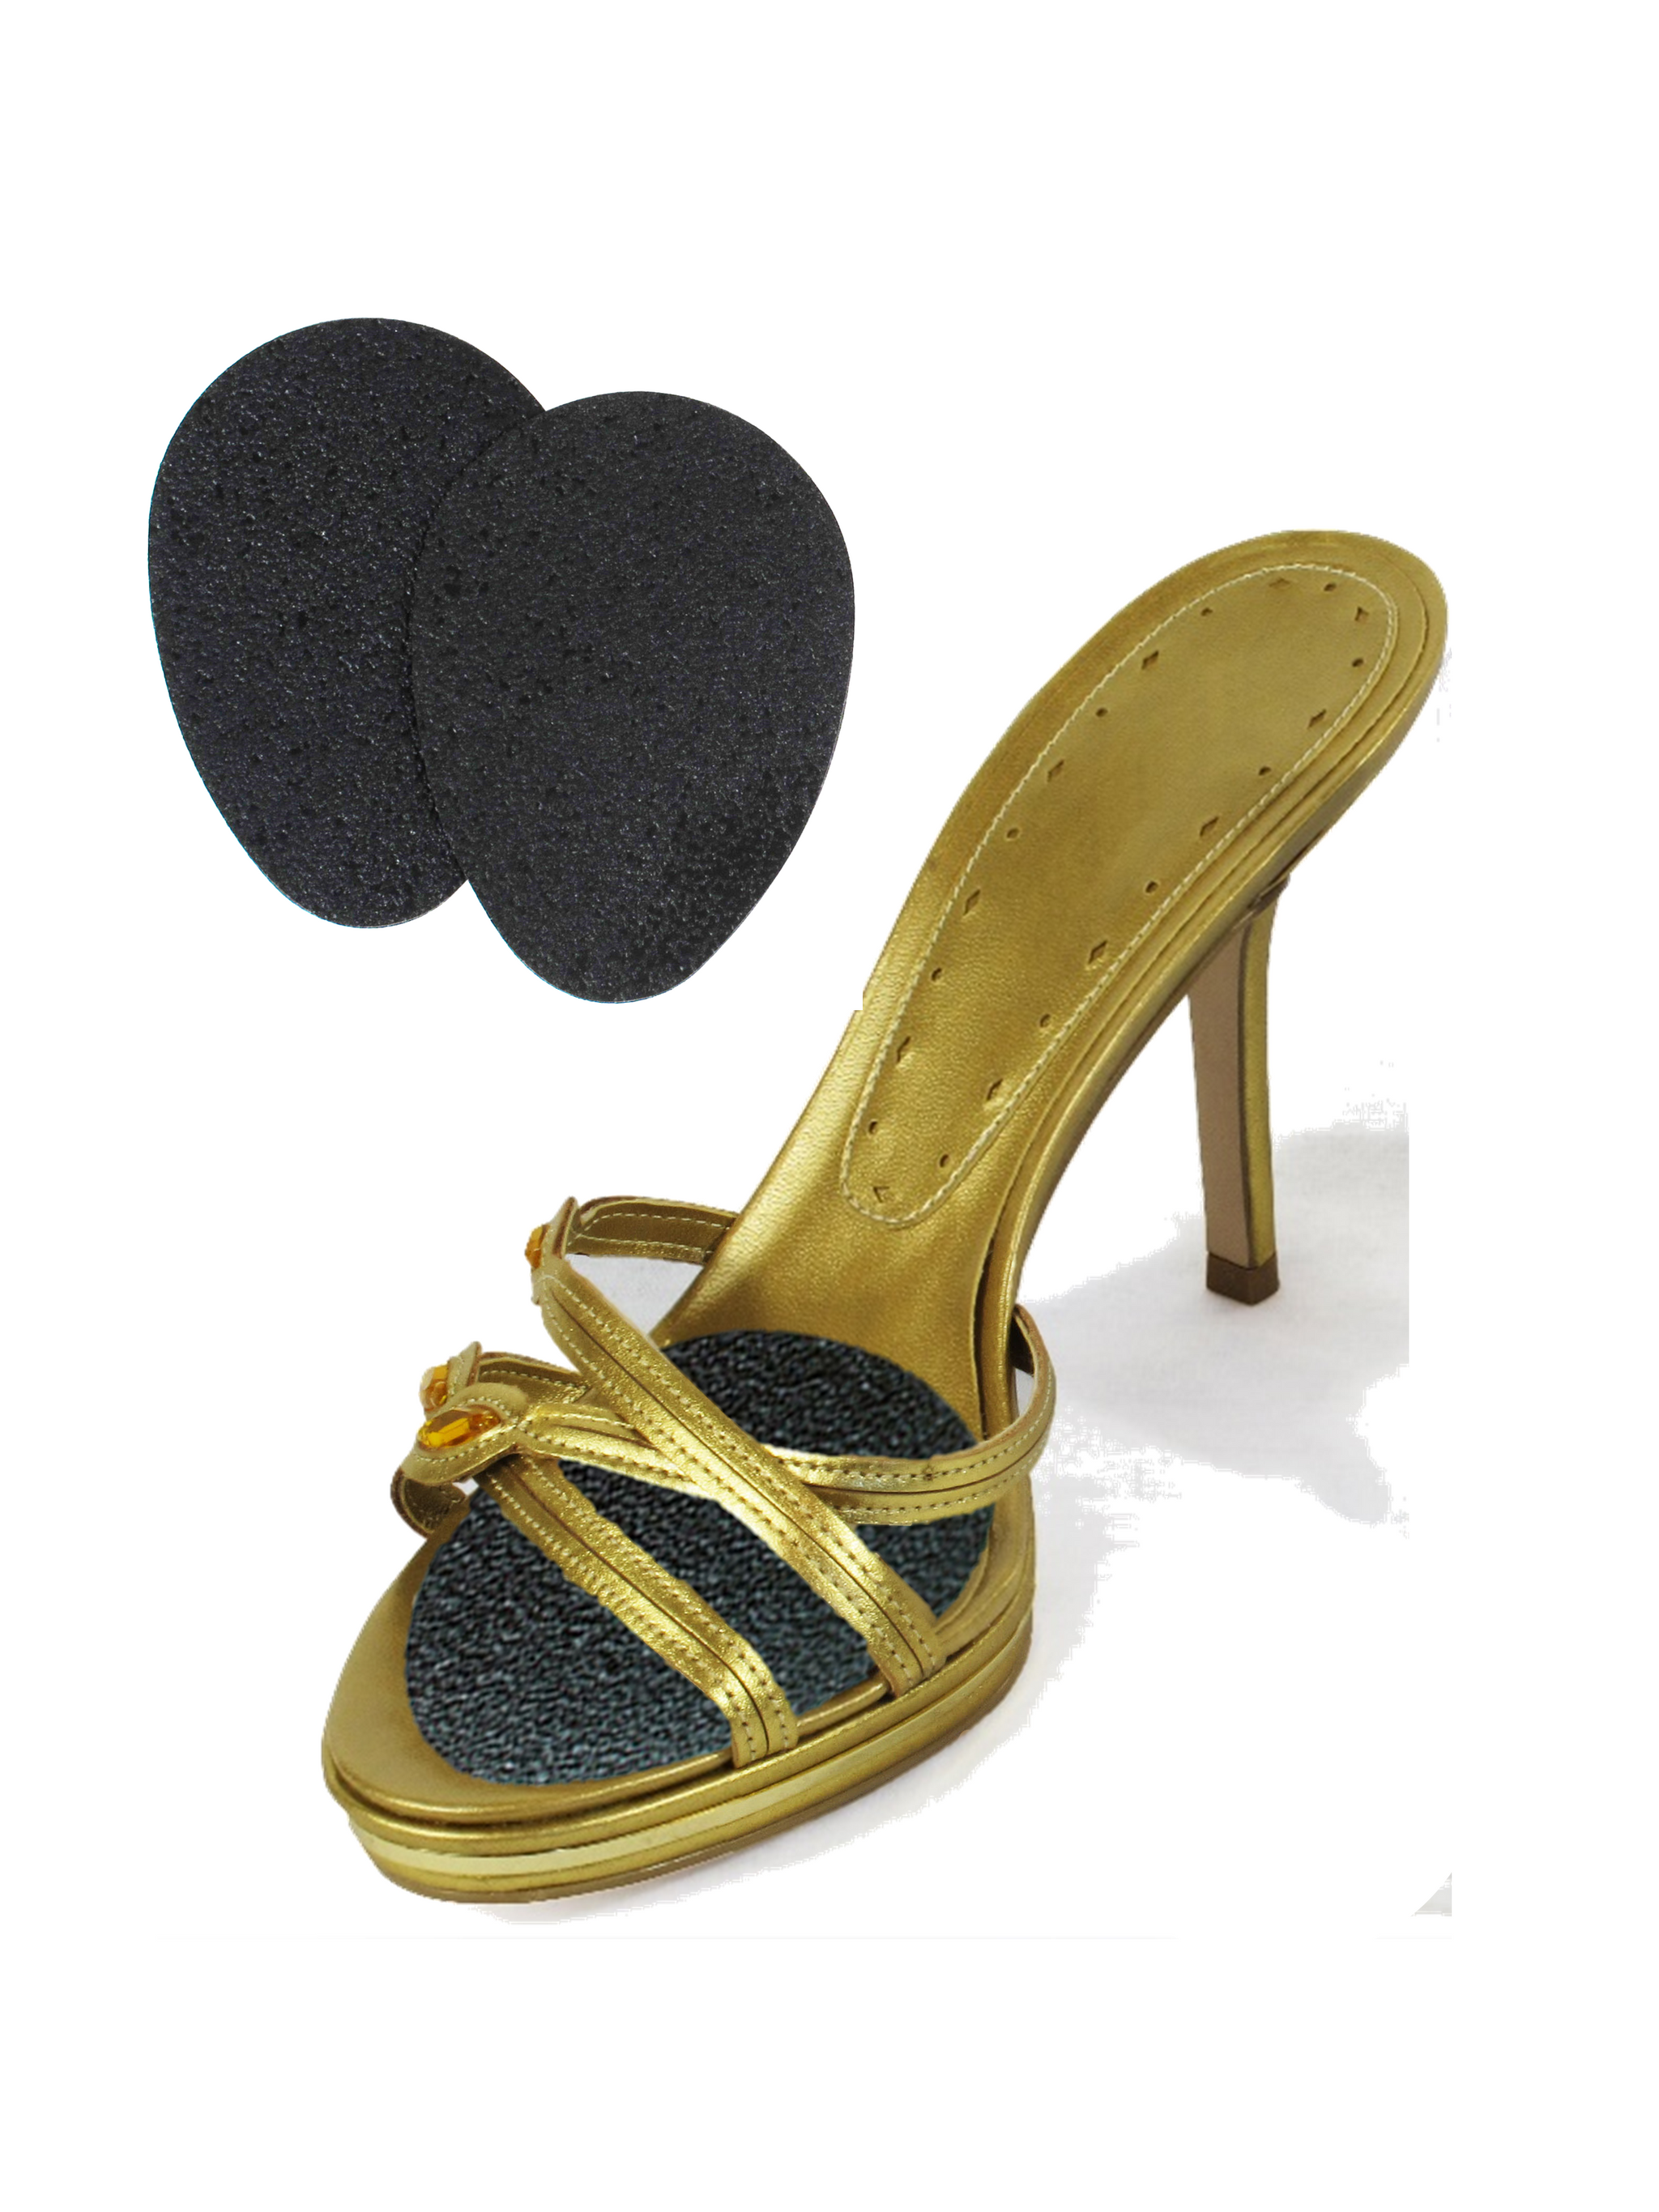 Everything About Pleaser Heels You Want to Know by A Shoe Addiction - Issuu